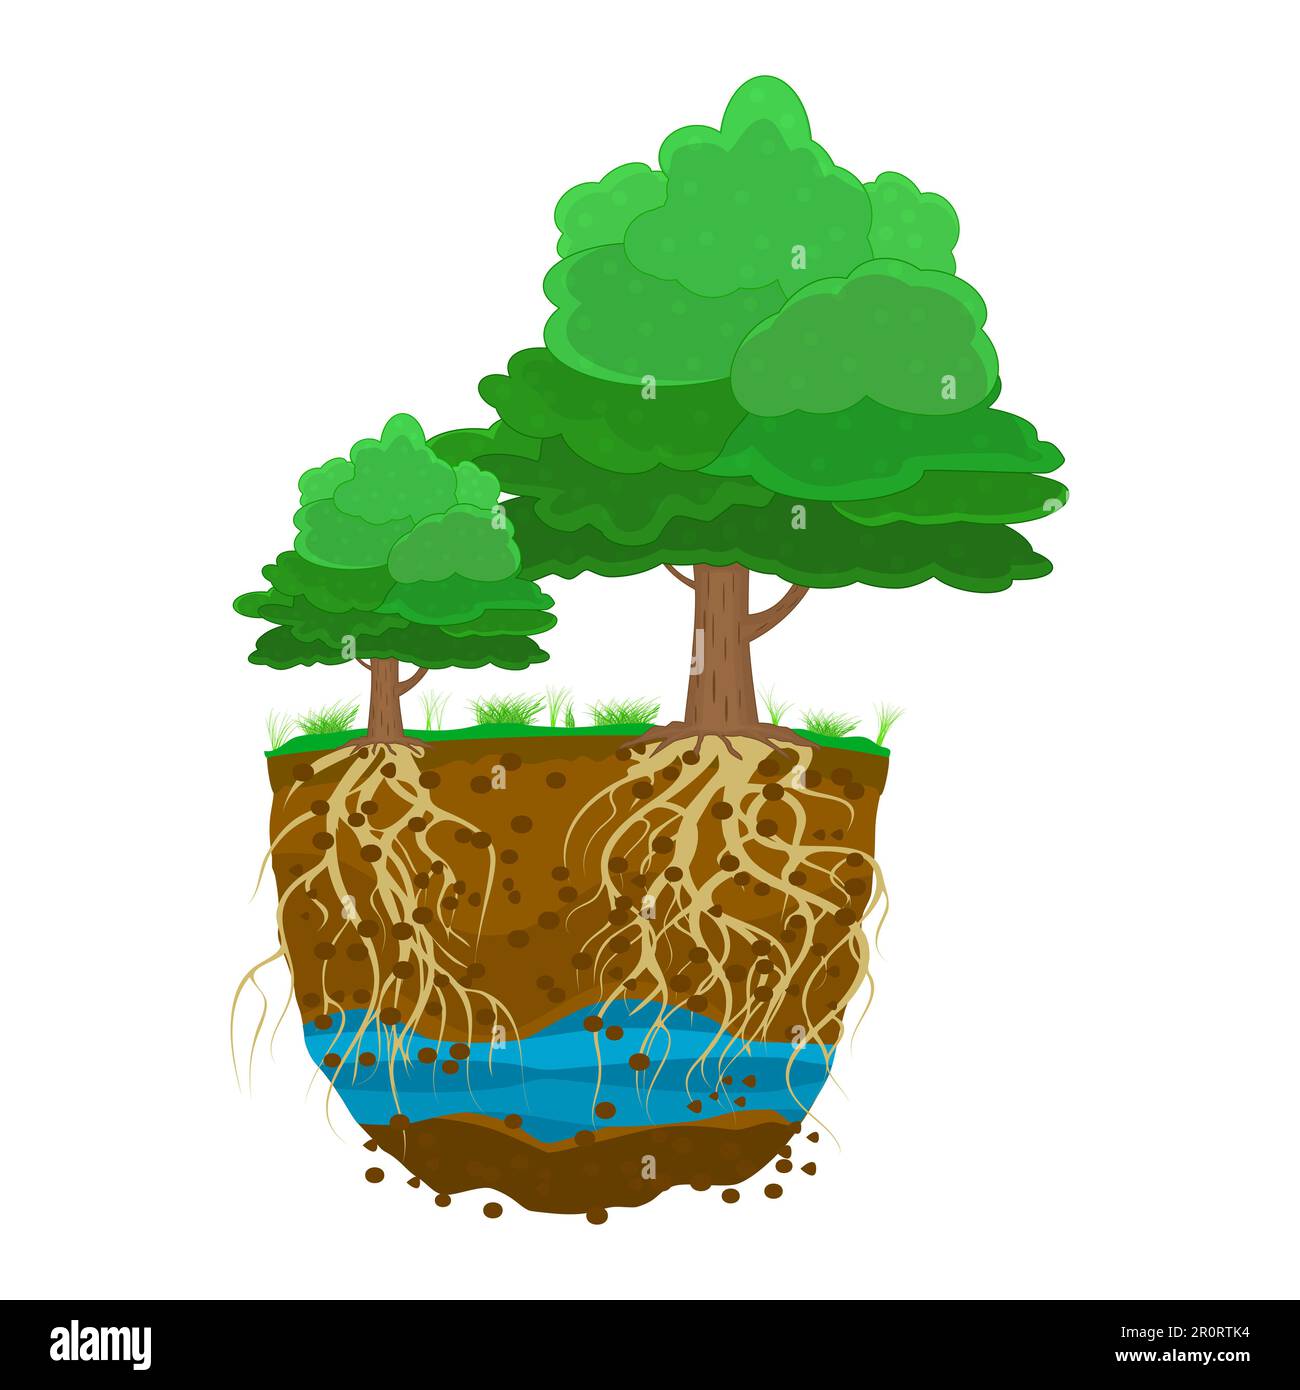 Trees with root system in soil.Plant with strong roots.Dirt layers, water, root.Cross section ground slice.Underground layers of earth and groundwater Stock Vector